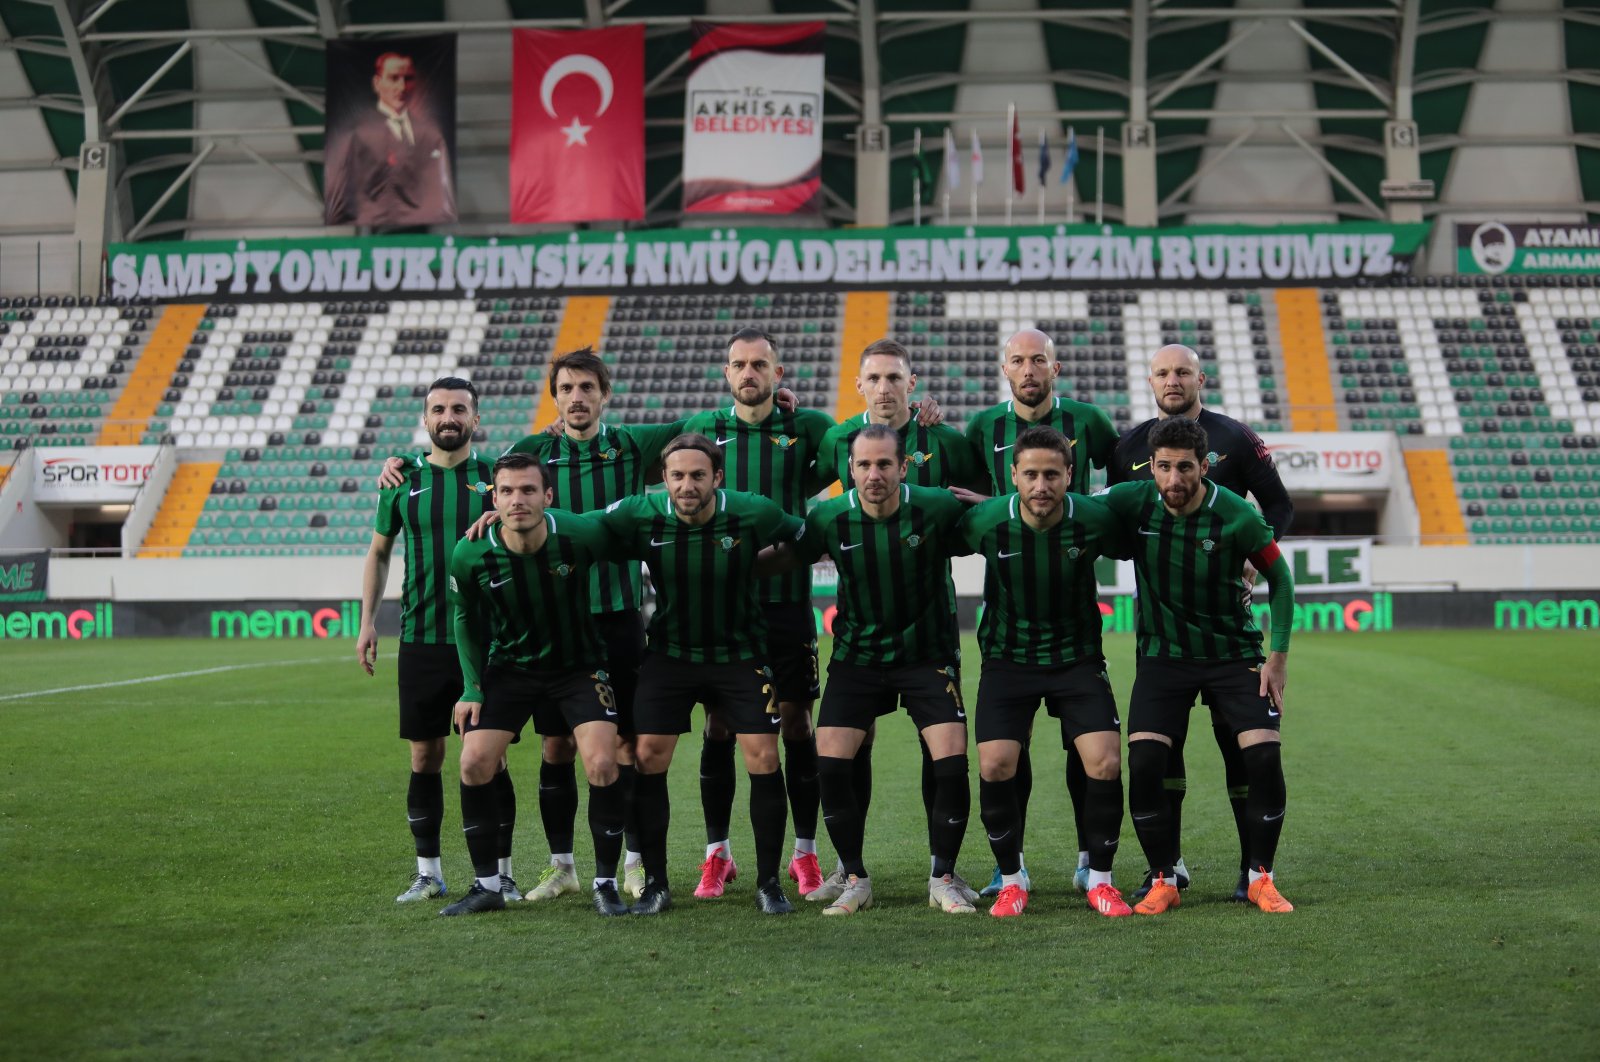 Akhisarspor competes in the second-tier football league of Turkey. (İHA Photo)